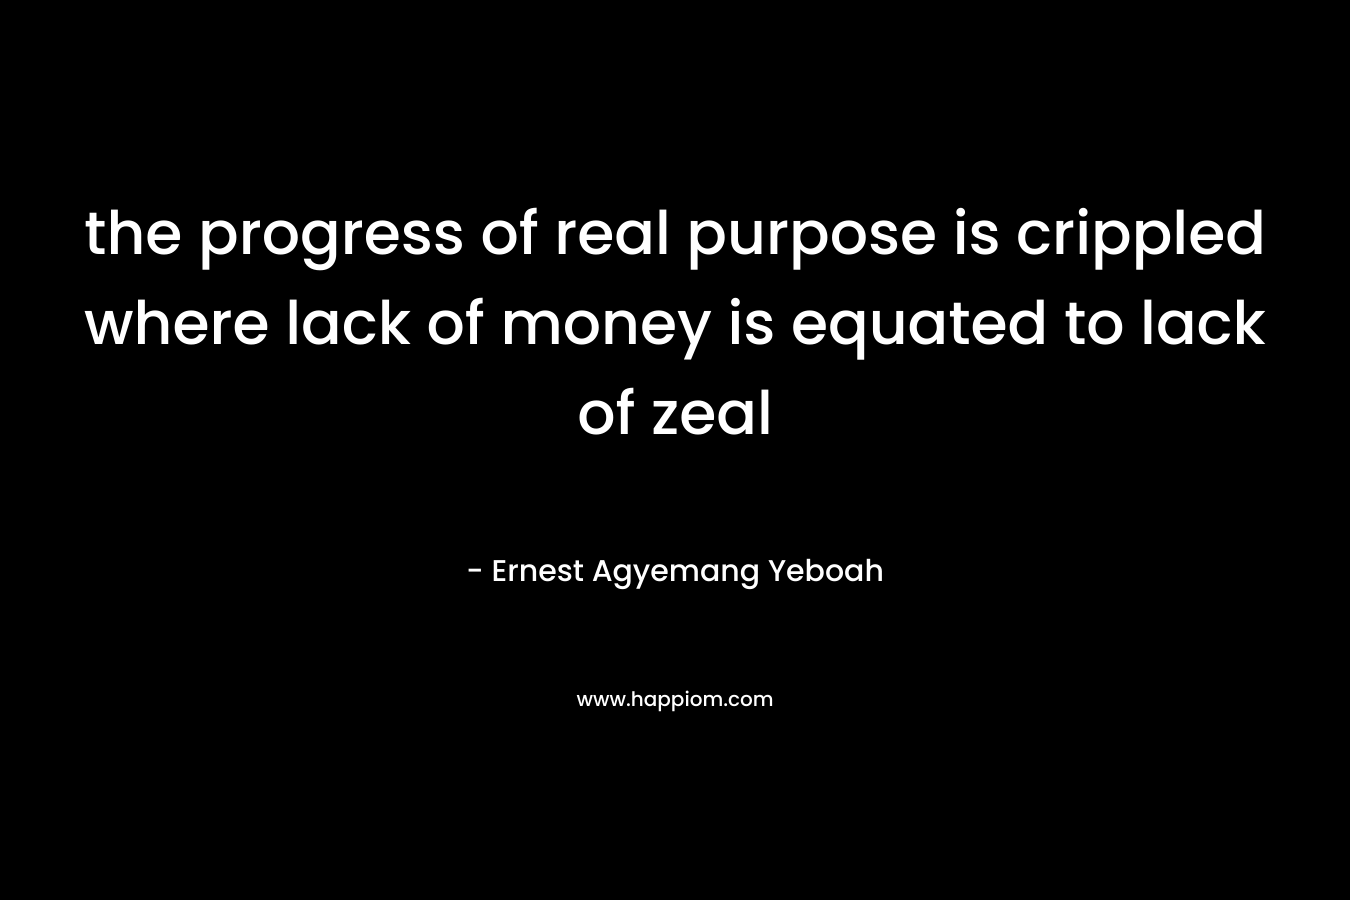 the progress of real purpose is crippled where lack of money is equated to lack of zeal